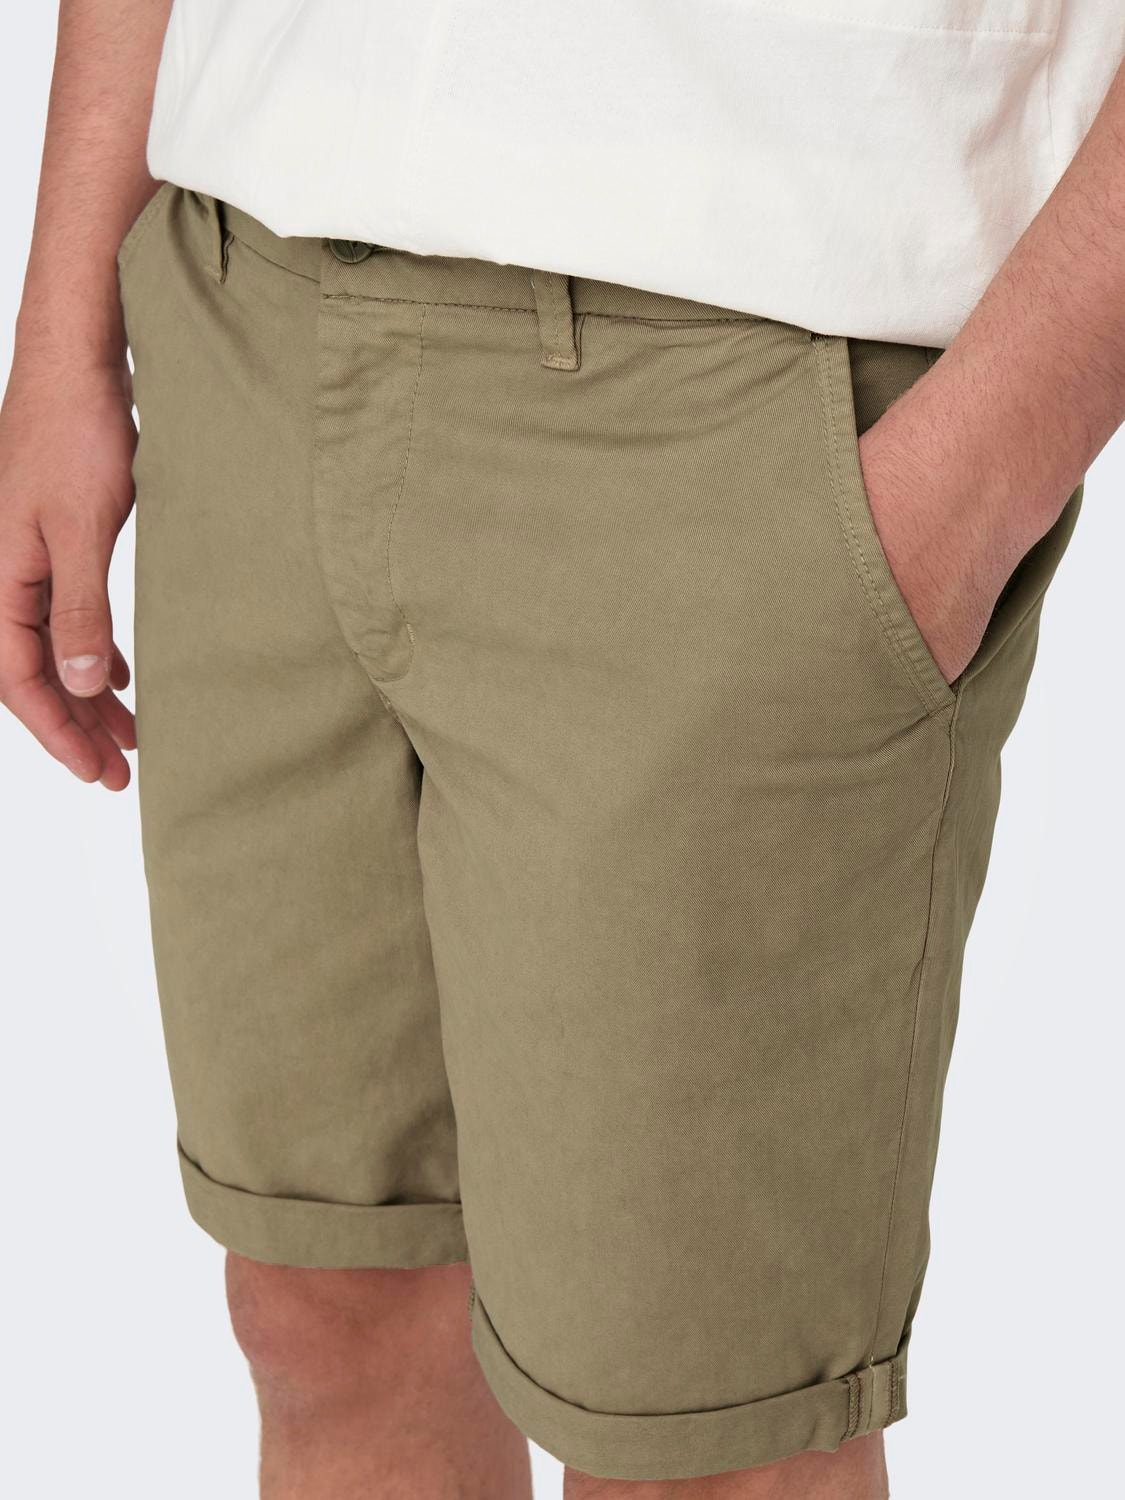 ONLY & SONS Regular Fit Shorts -Chinchilla - 22024481